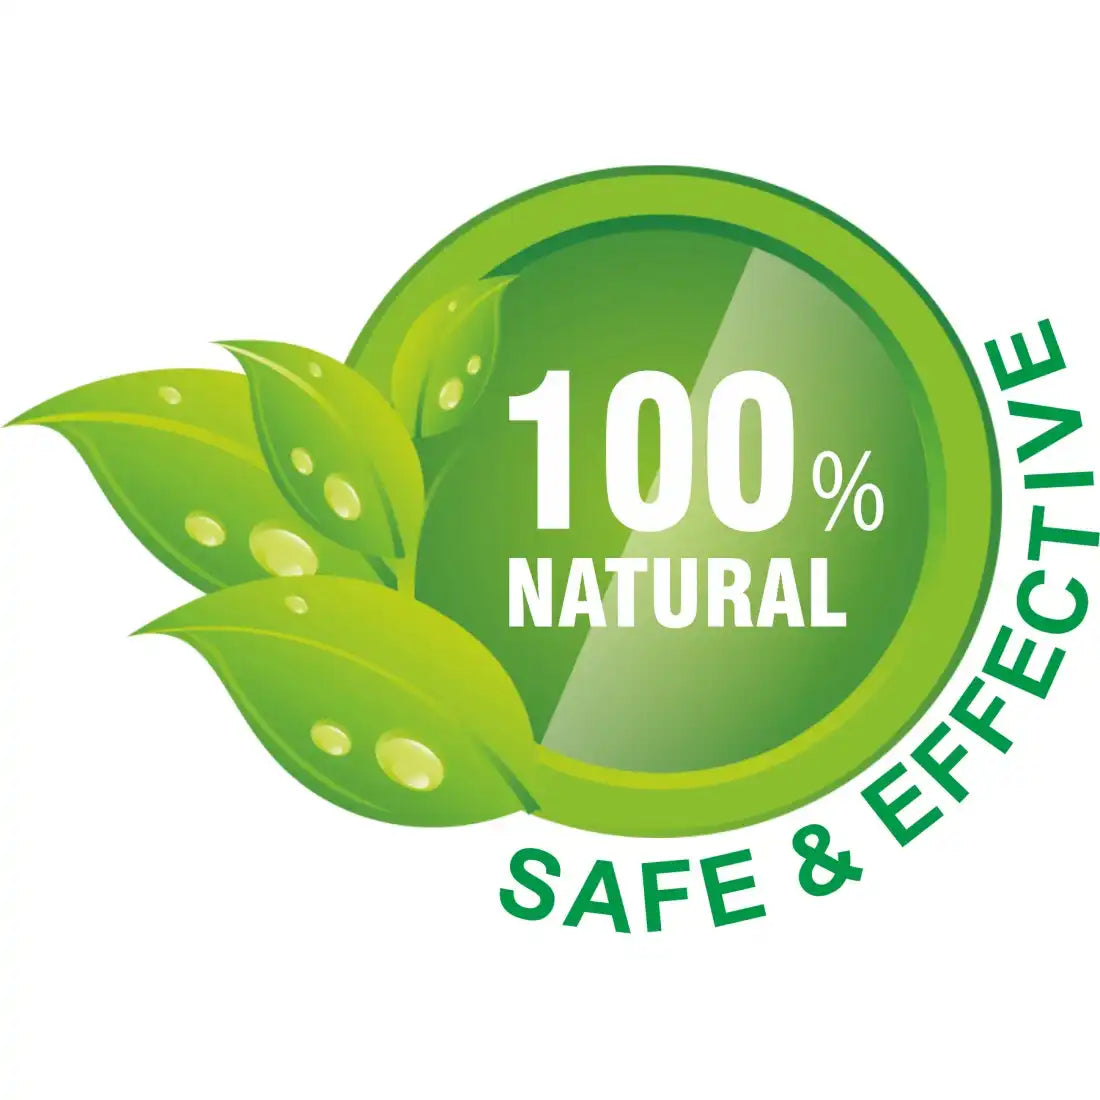 This Nature Sure Product Is Natural, Safe and Effective - everteen-neud.com